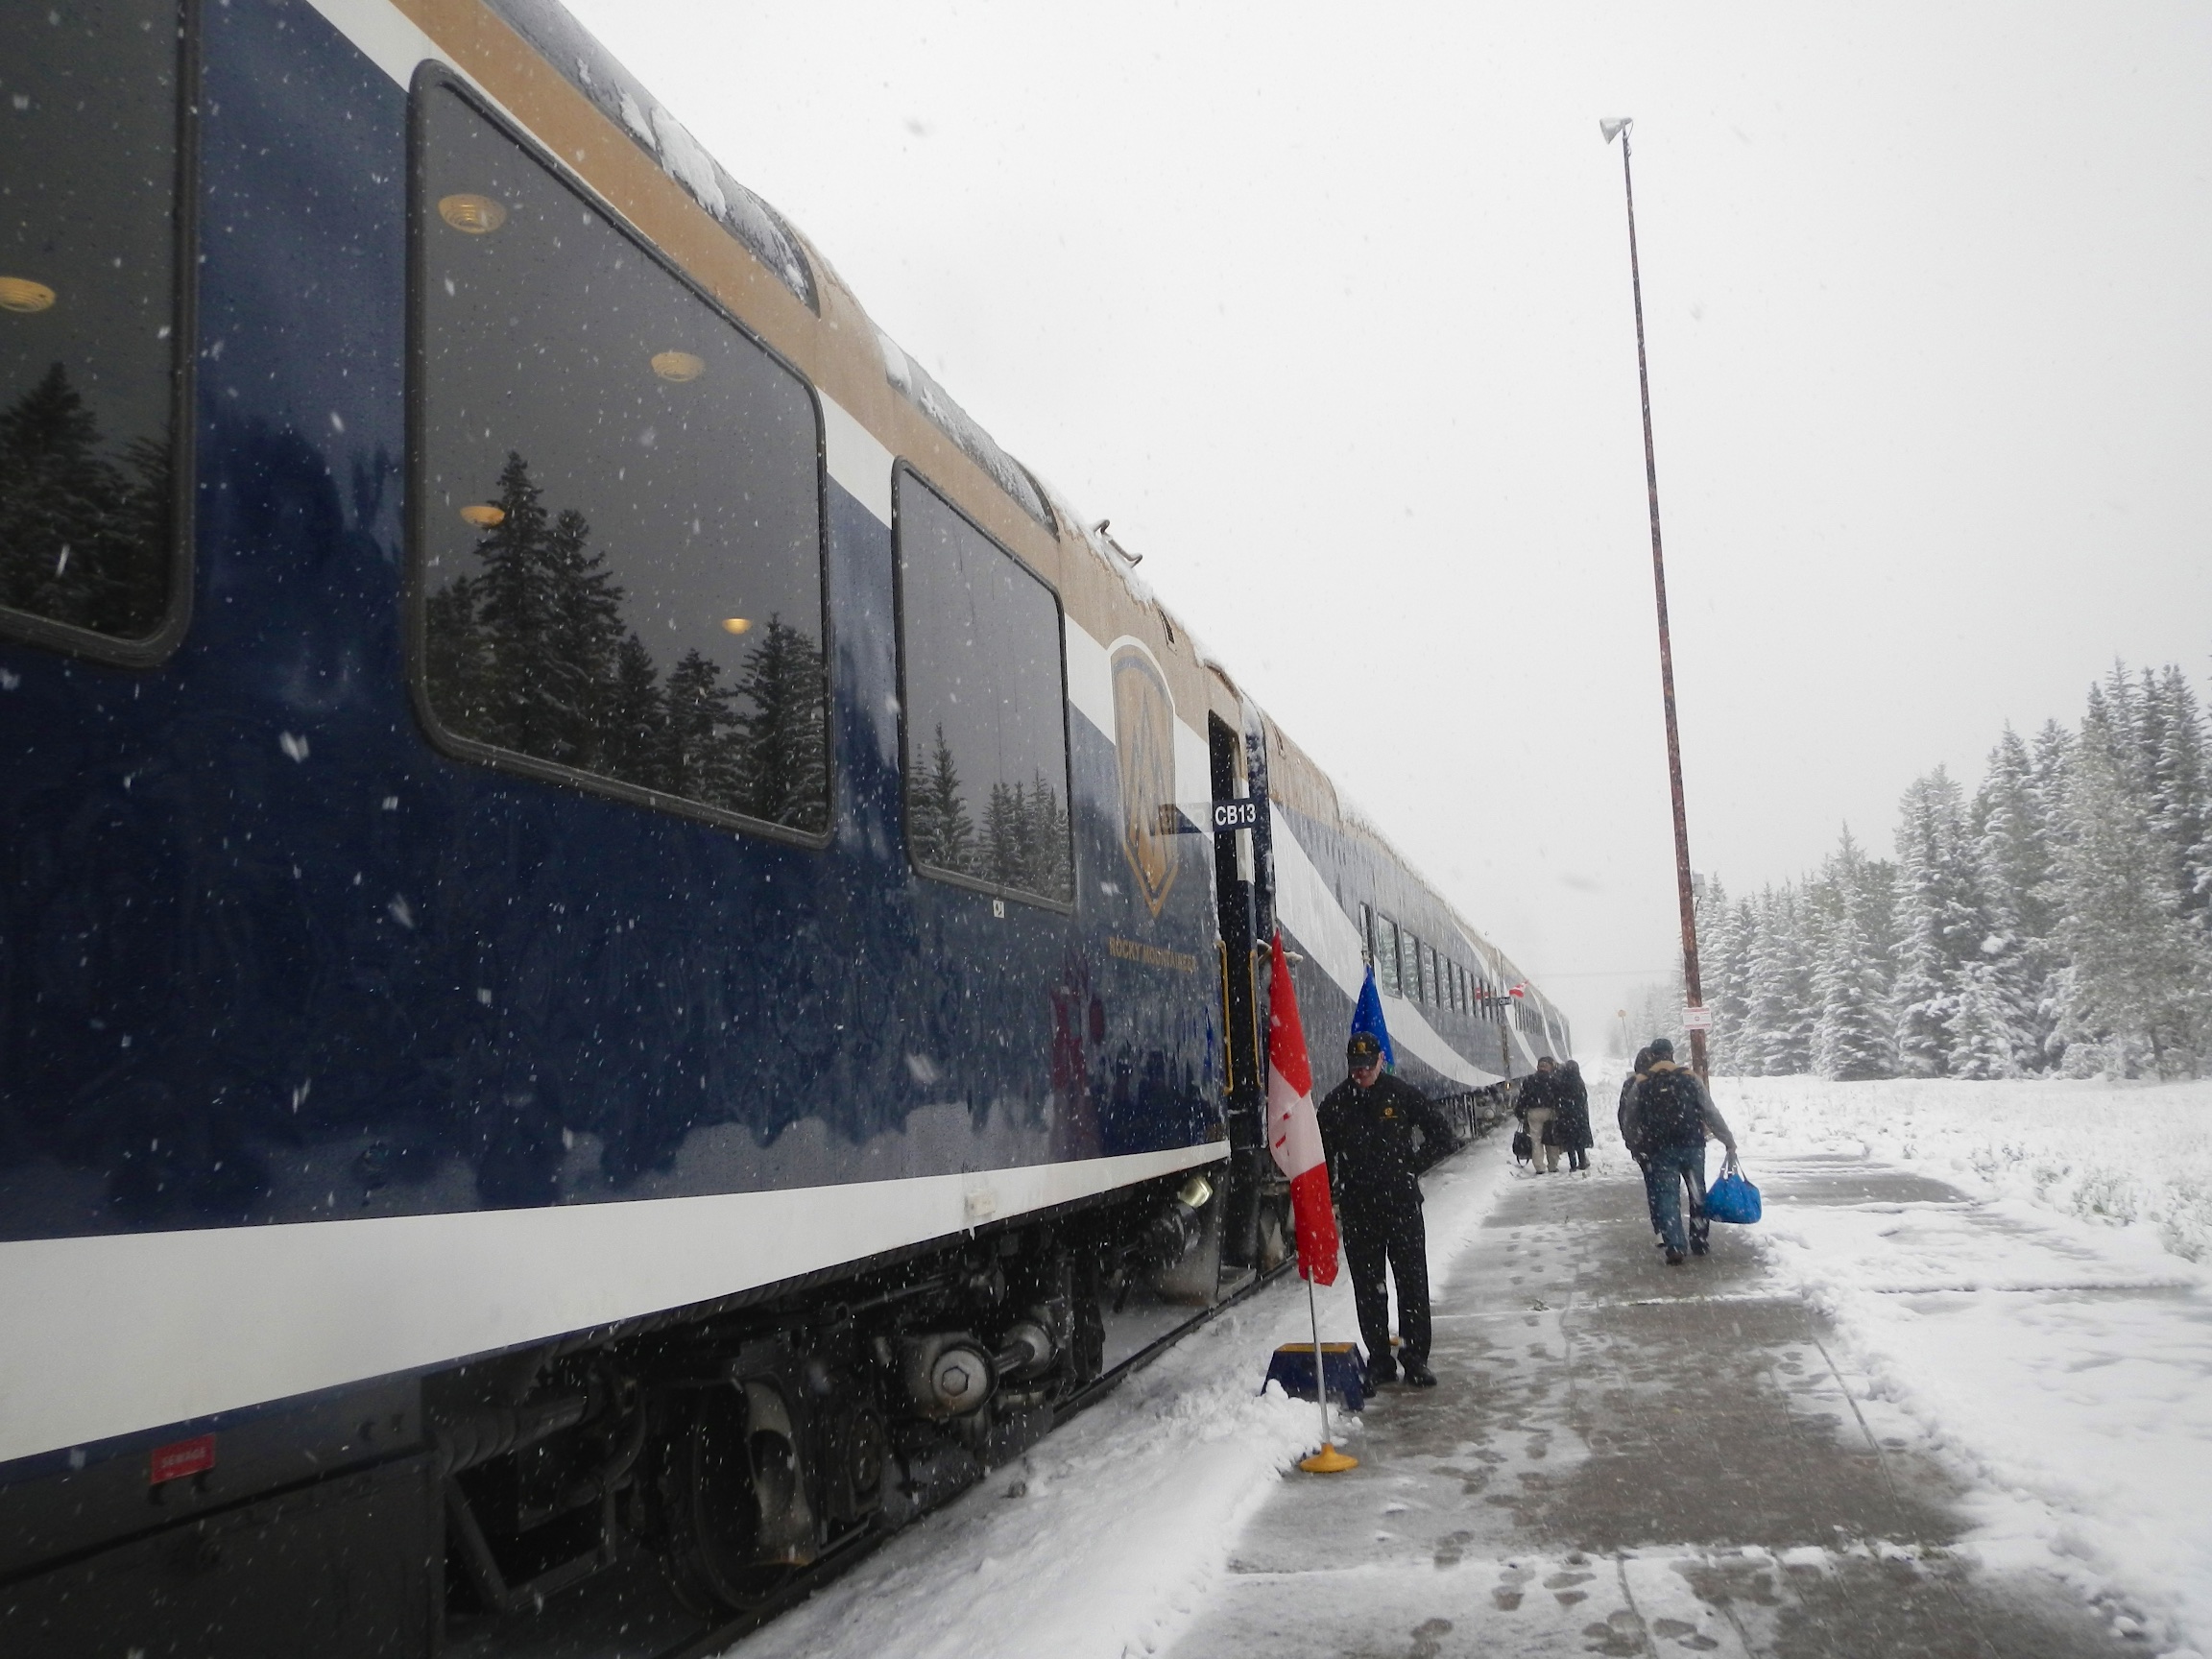  Our carriage on the Rocky Mountaineer, railway stn, Banff, Alberta, Canada 